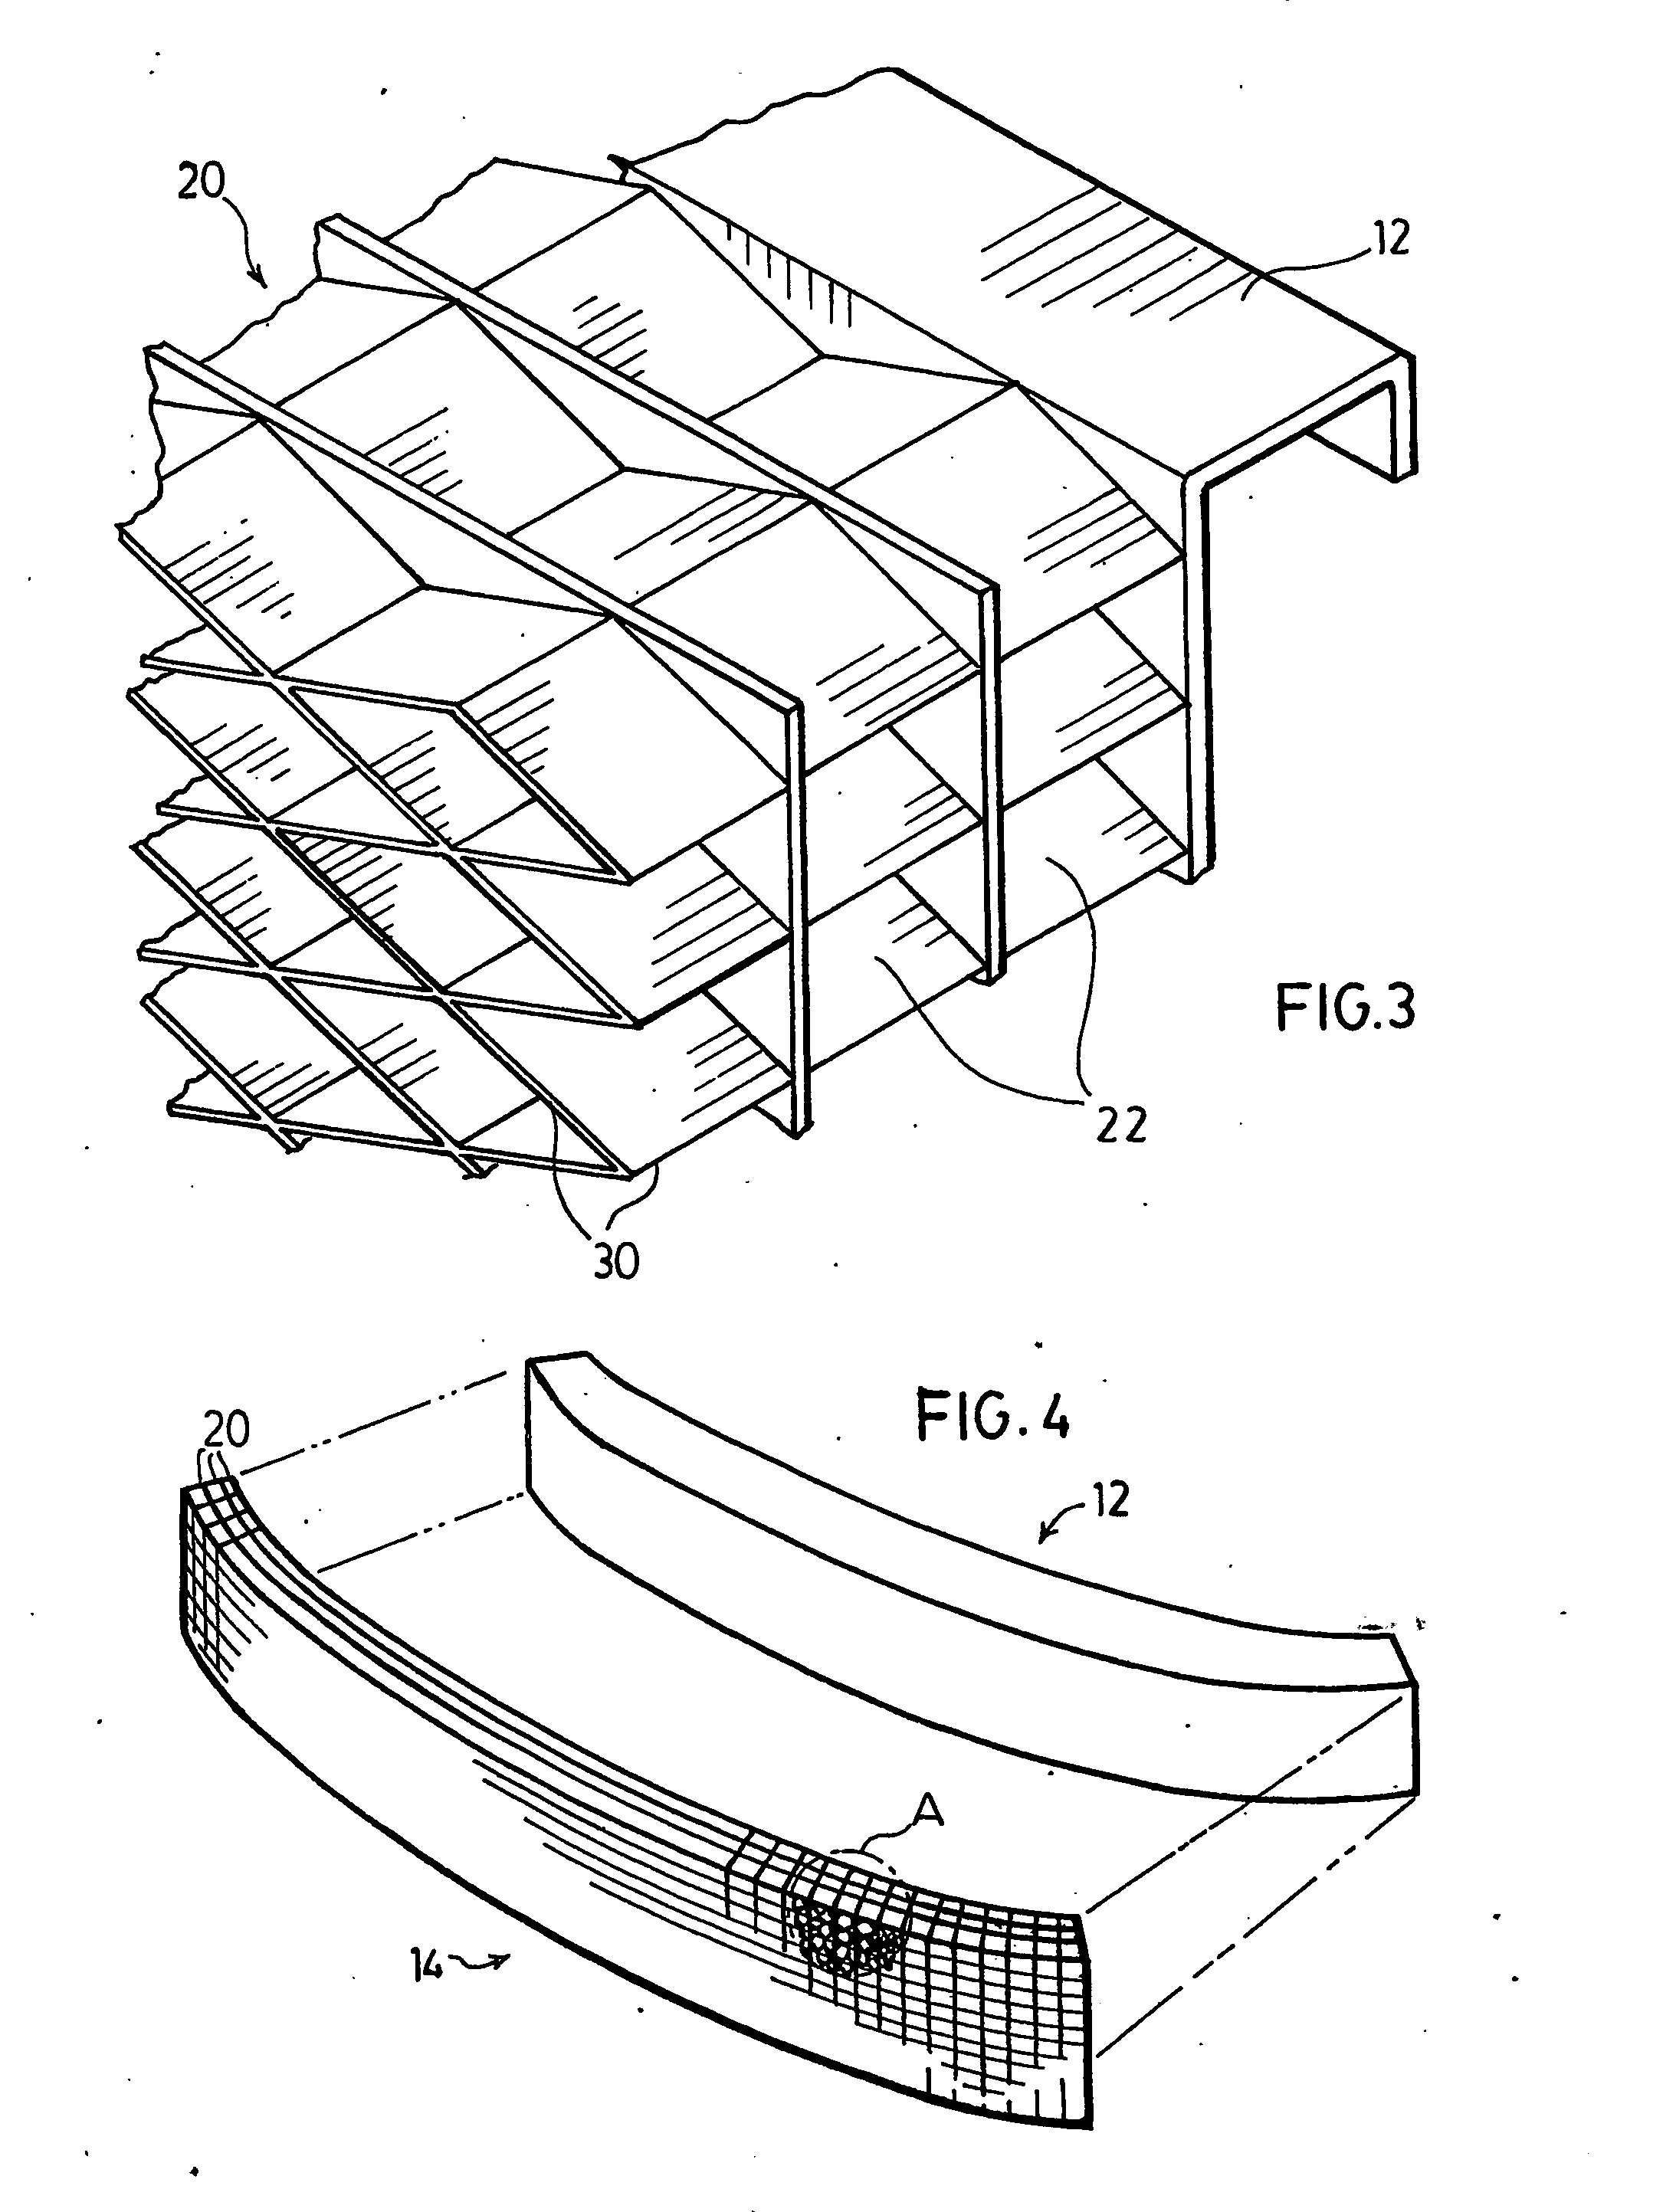 Bumper energy absorber and method of fabricaitng and assembling the same